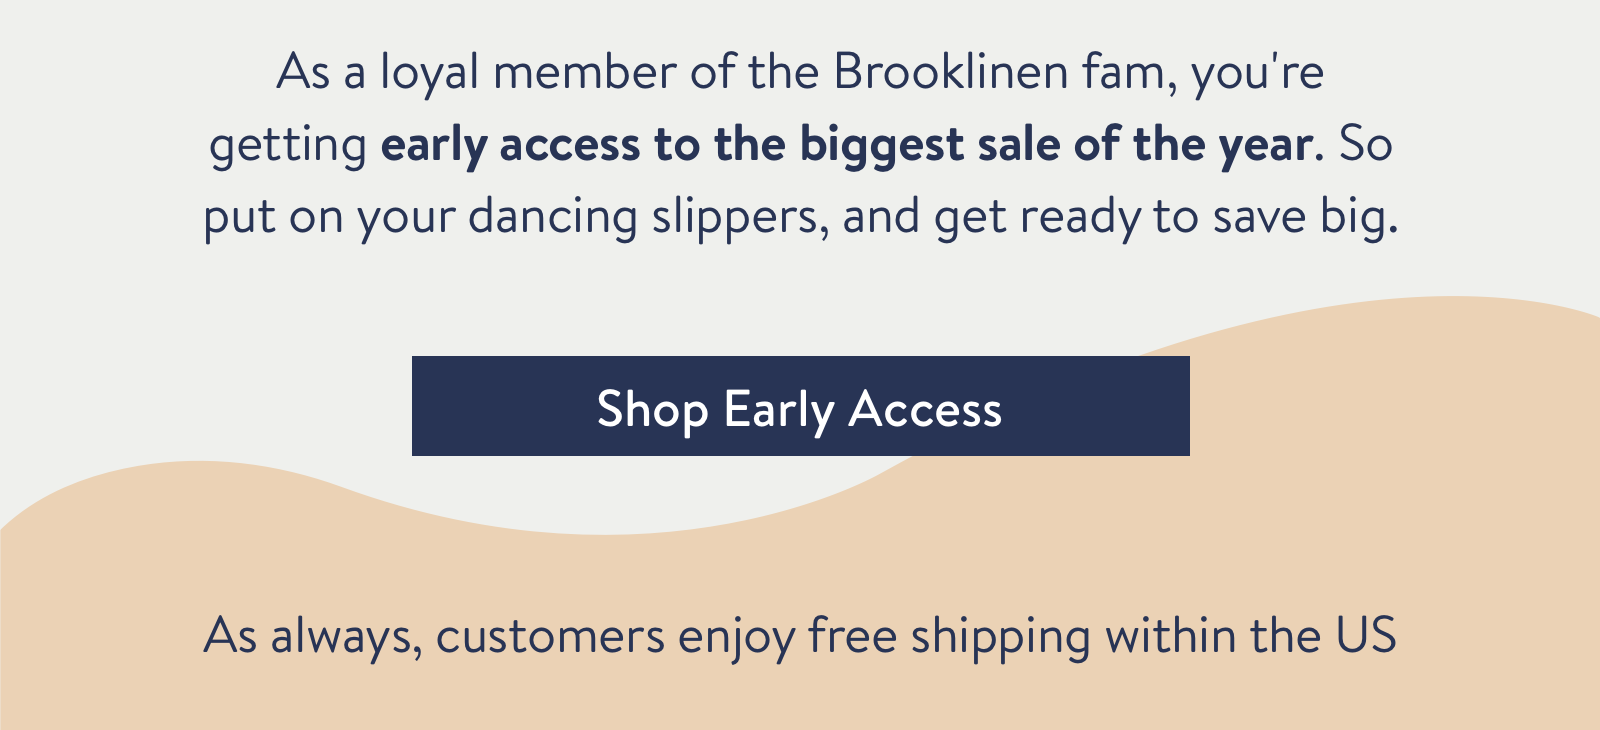 Shop early access to the biggest sale of the year.